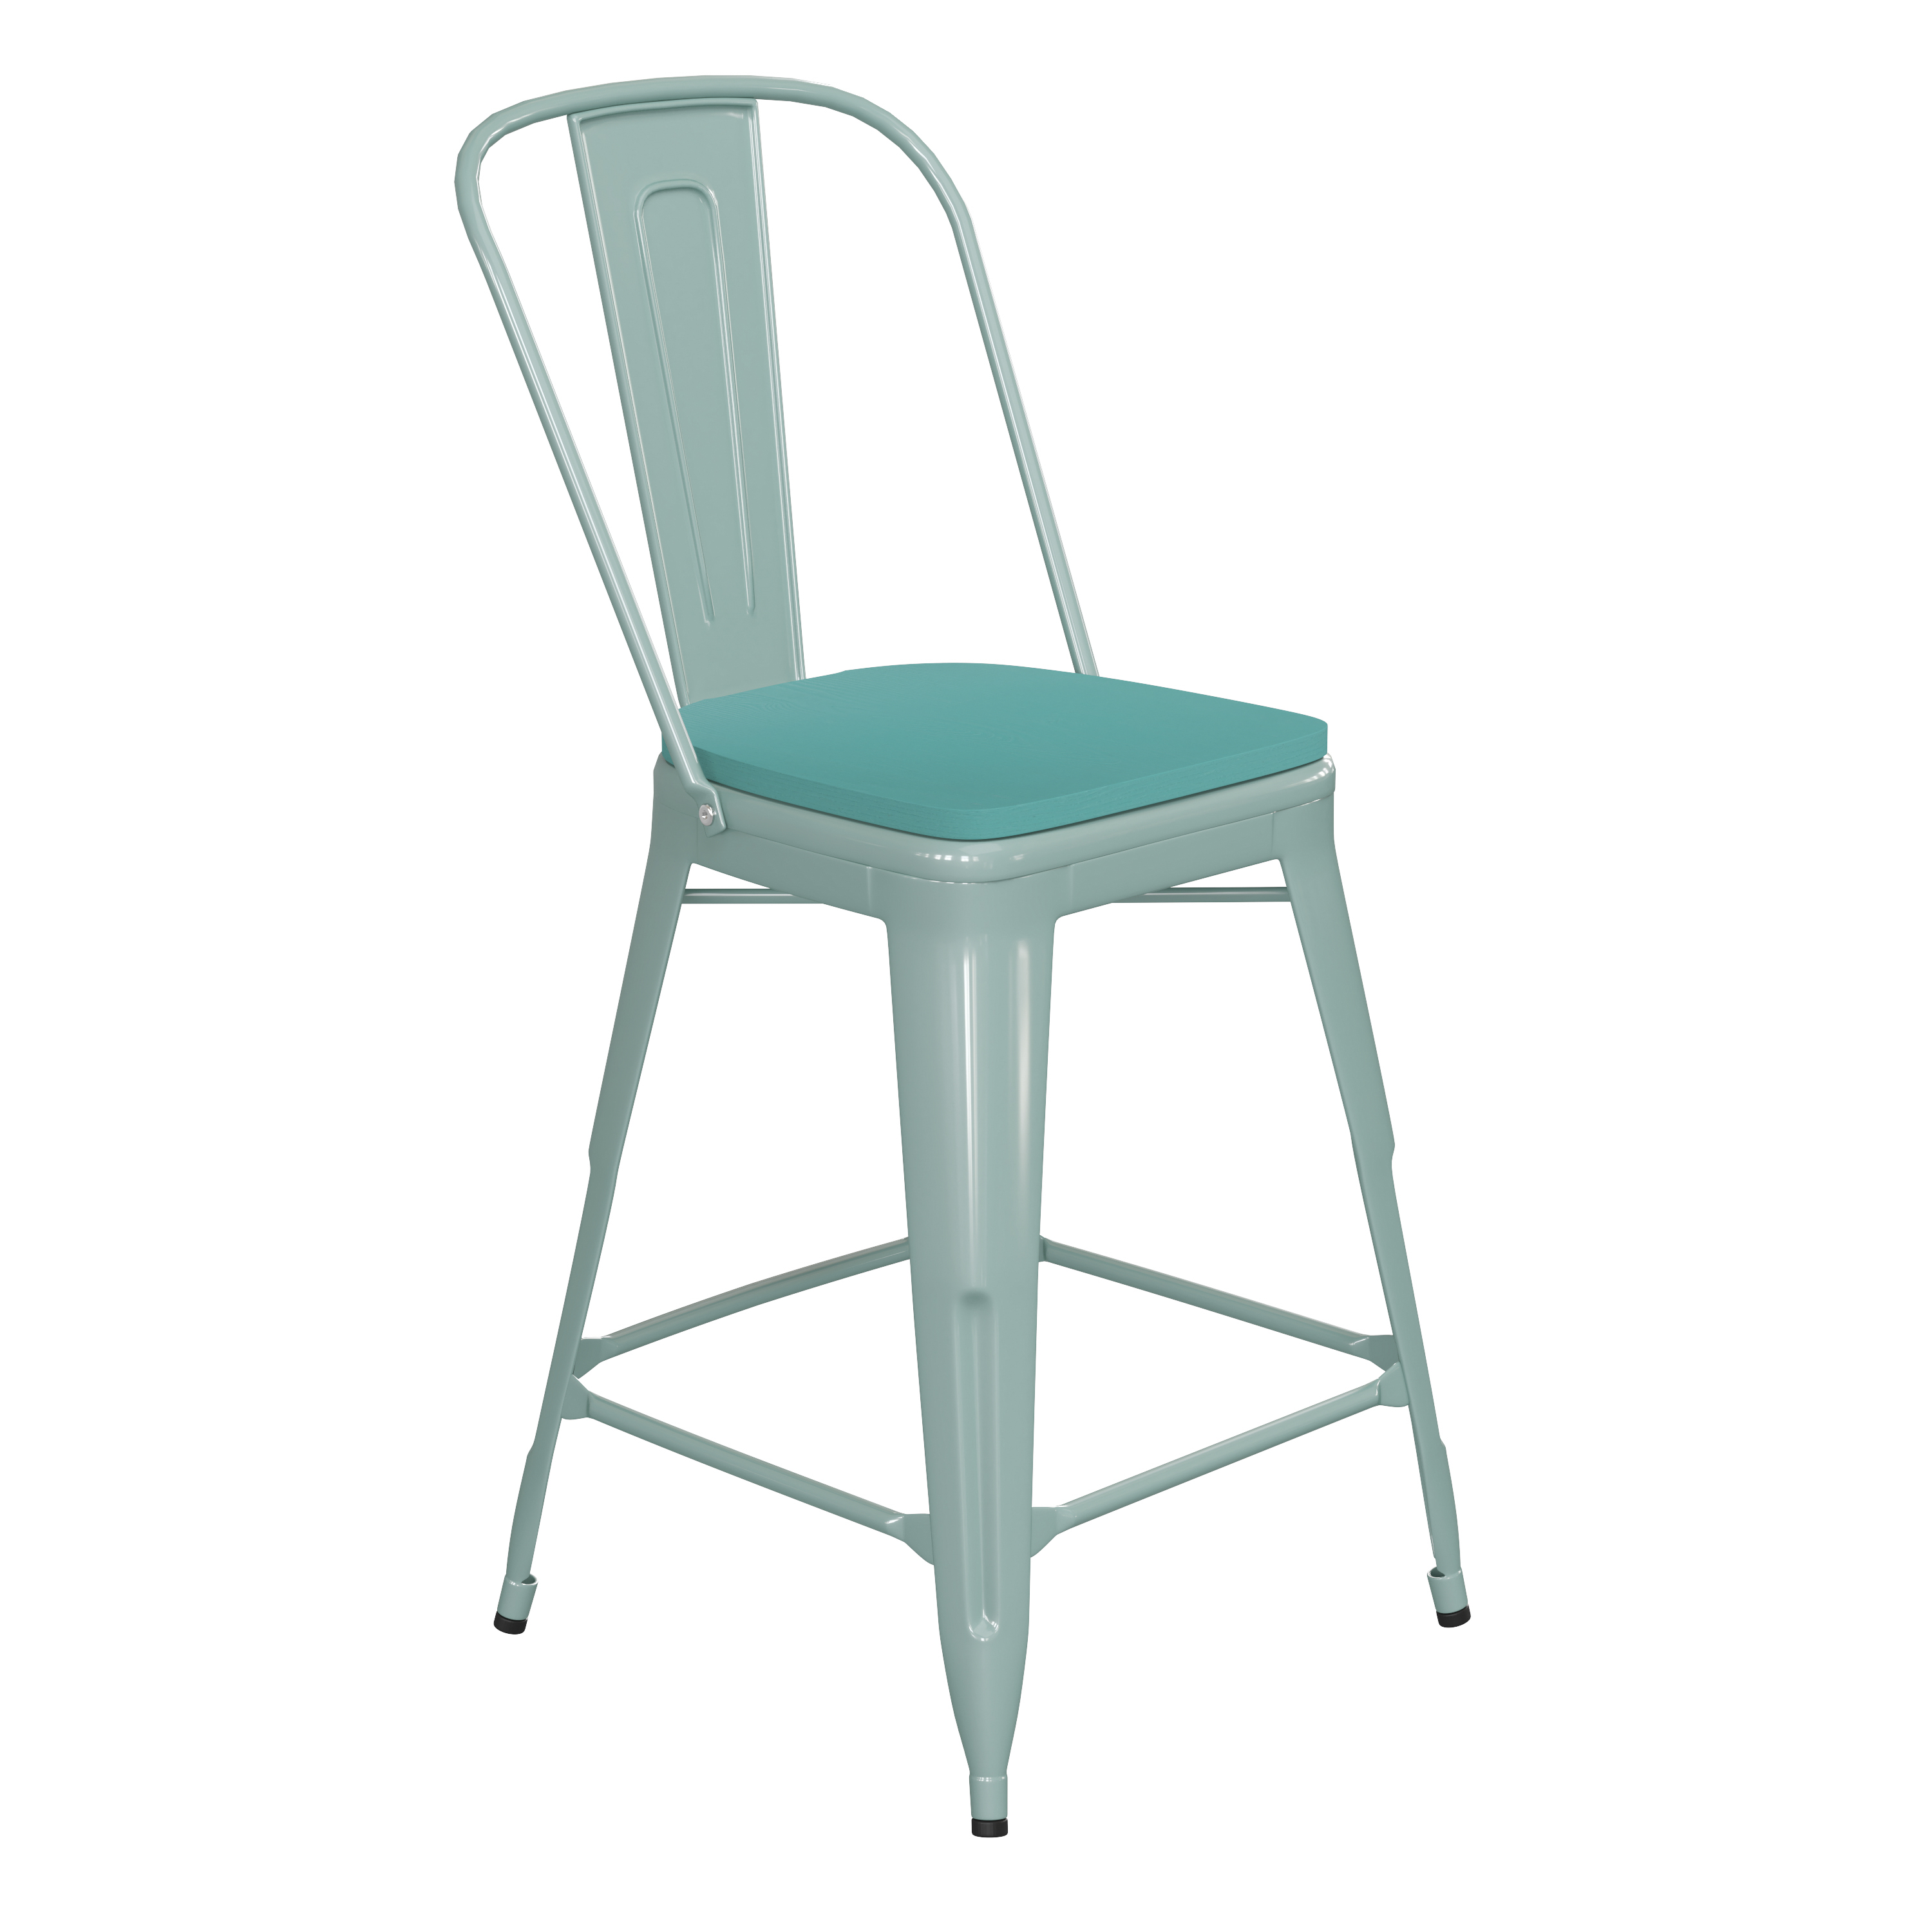 Flash Furniture ET-3534-24-MINT-PL1M-GG 24" Mint Green Metal Indoor/Outdoor Counter Height Stool with Back with Mint Green Poly Resin Wood Seat